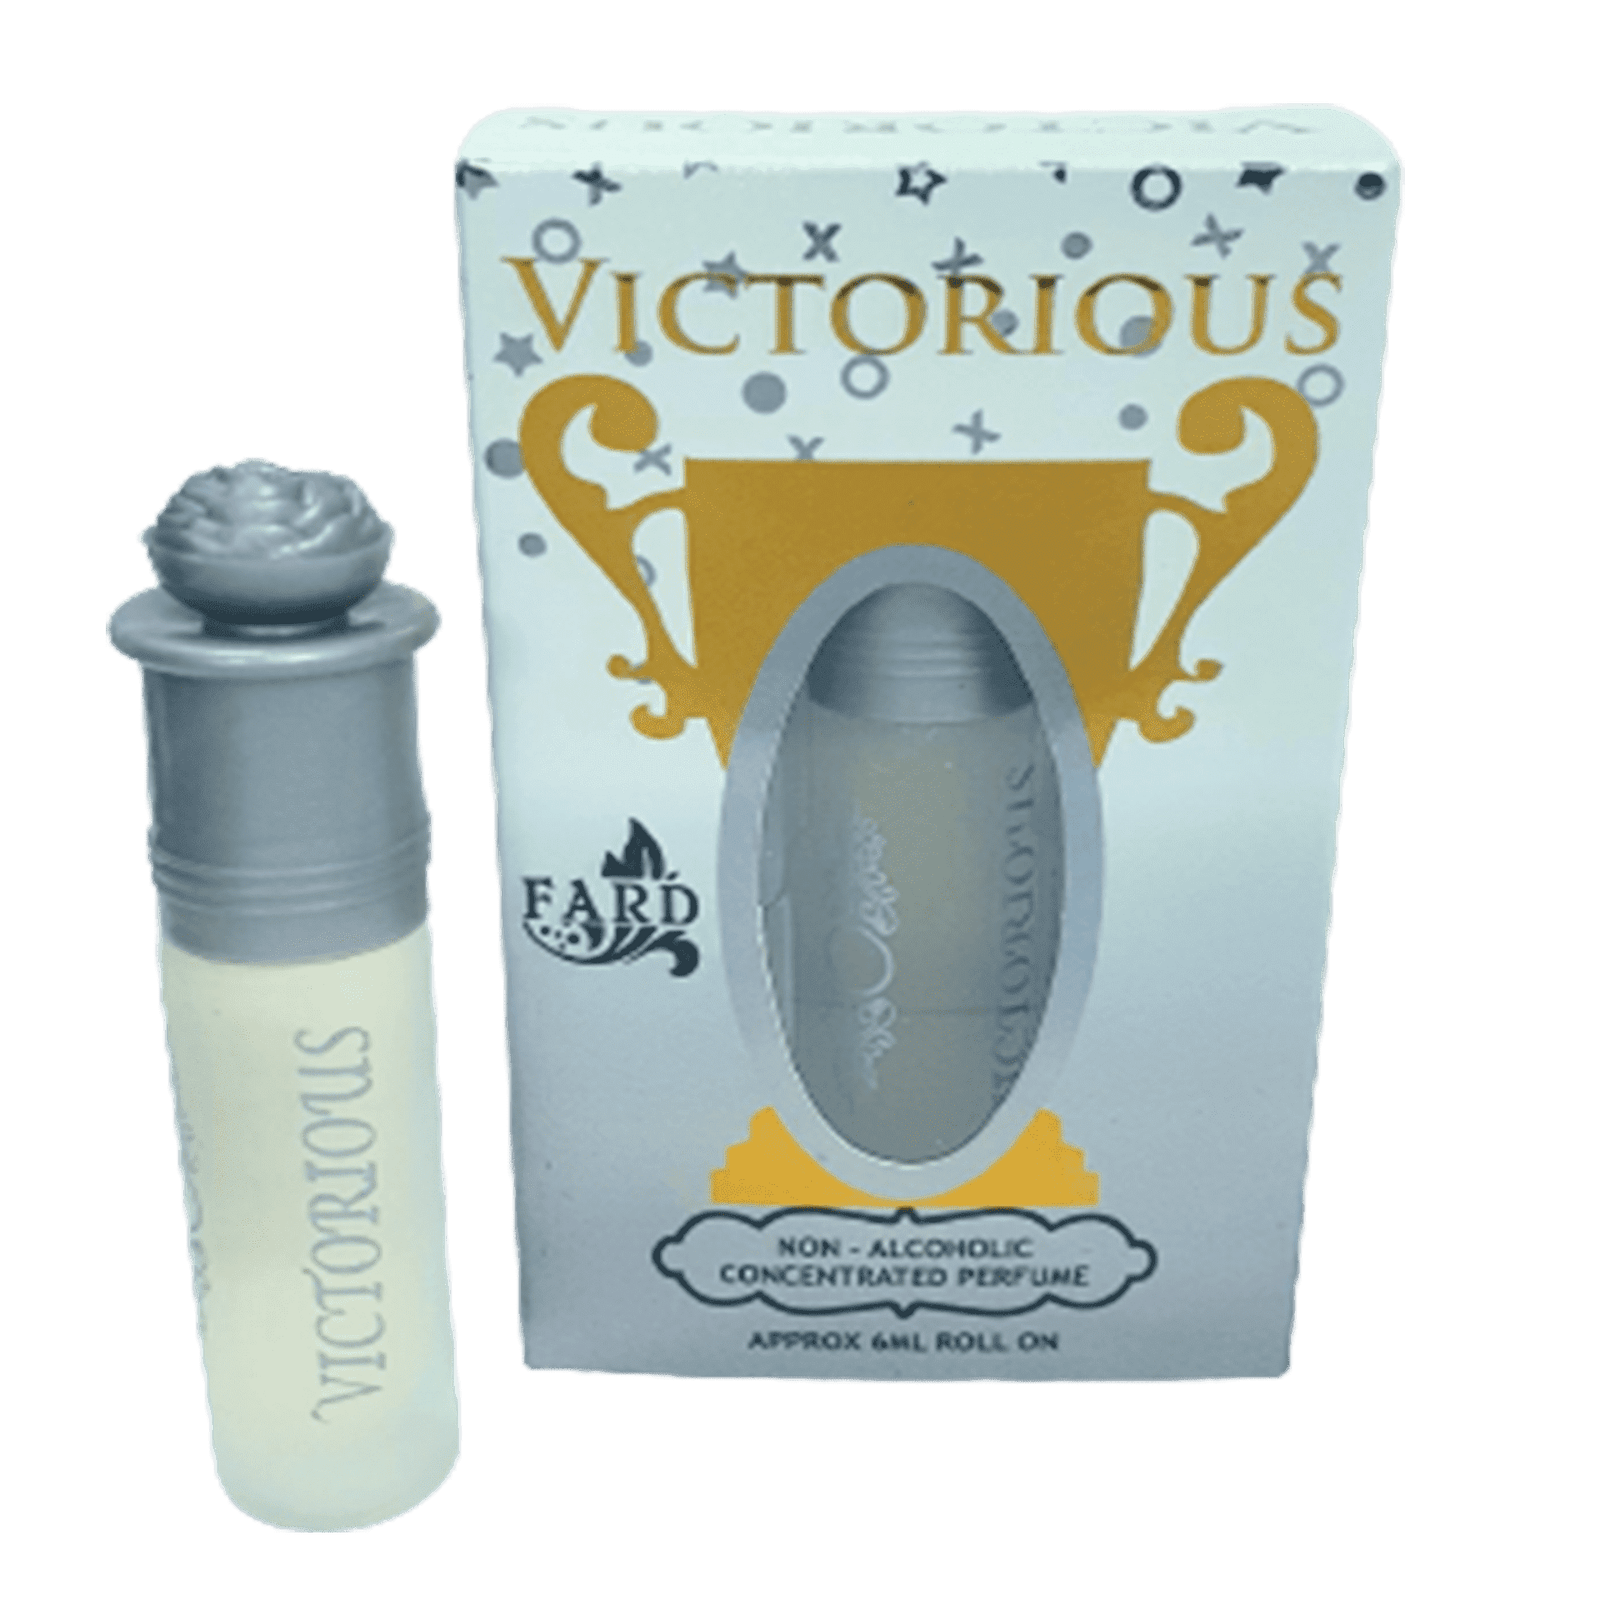 victorious-fornt